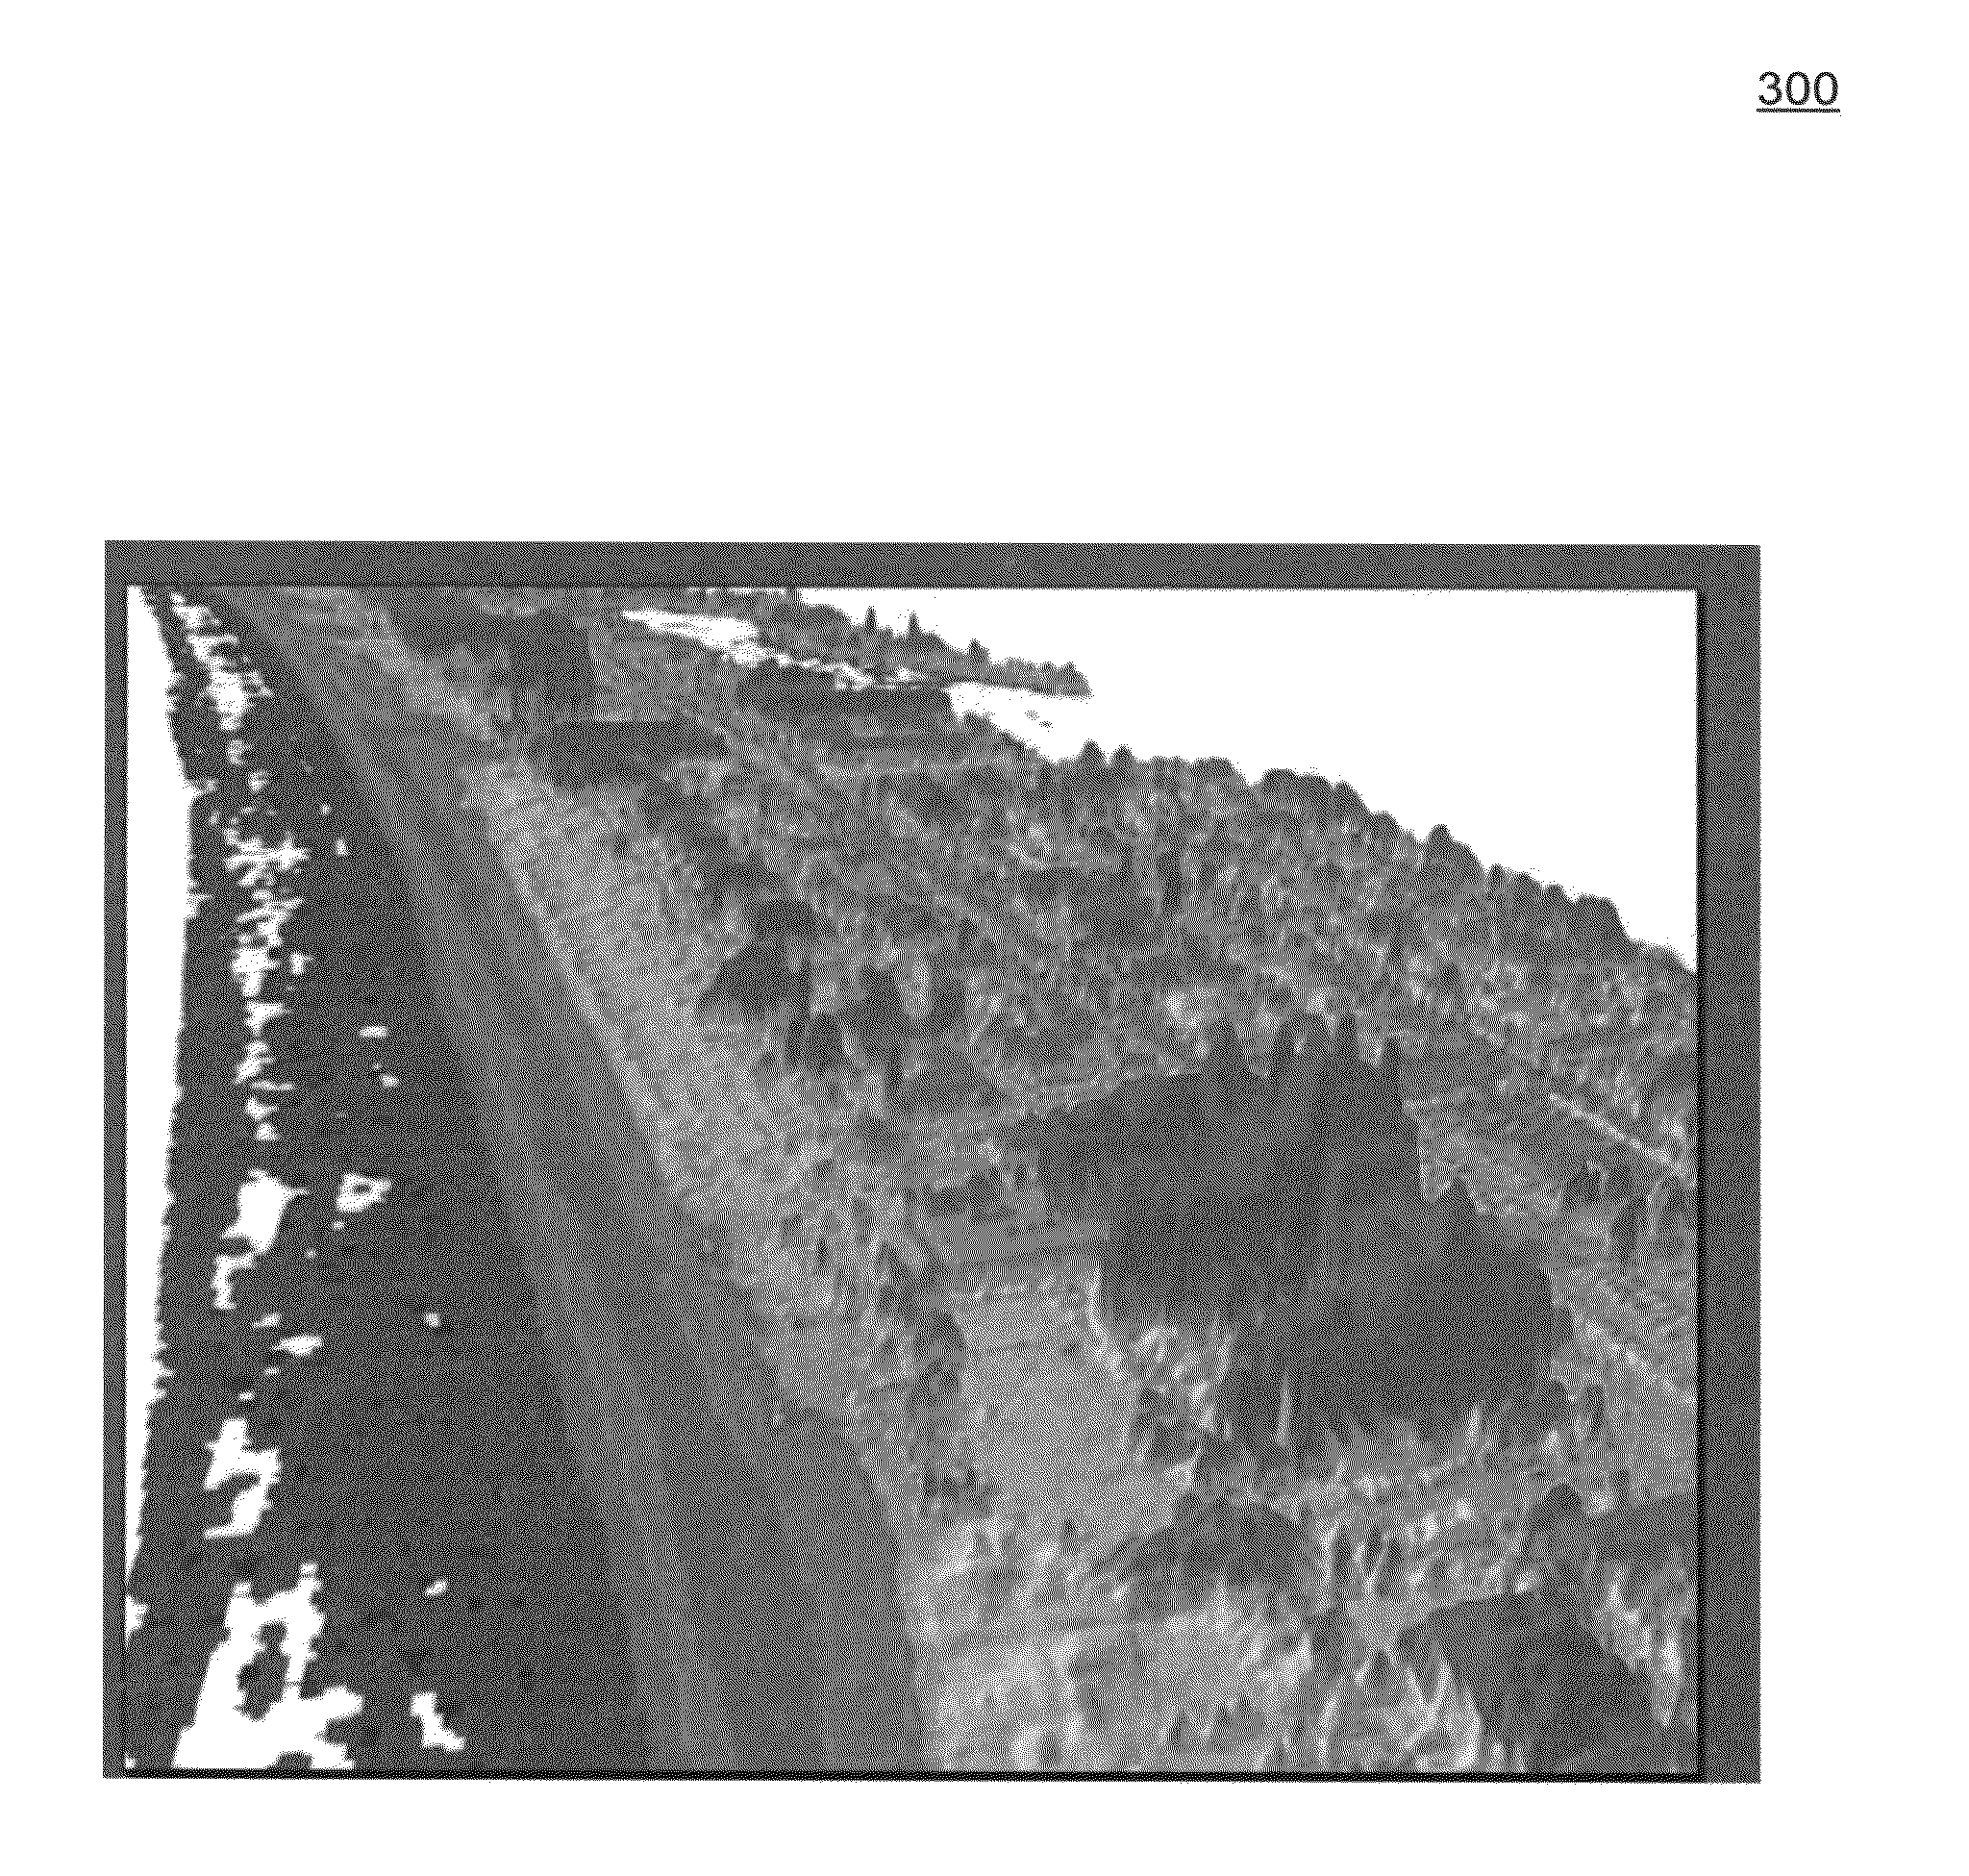 Methods for identifying rooftops using elevation data sets